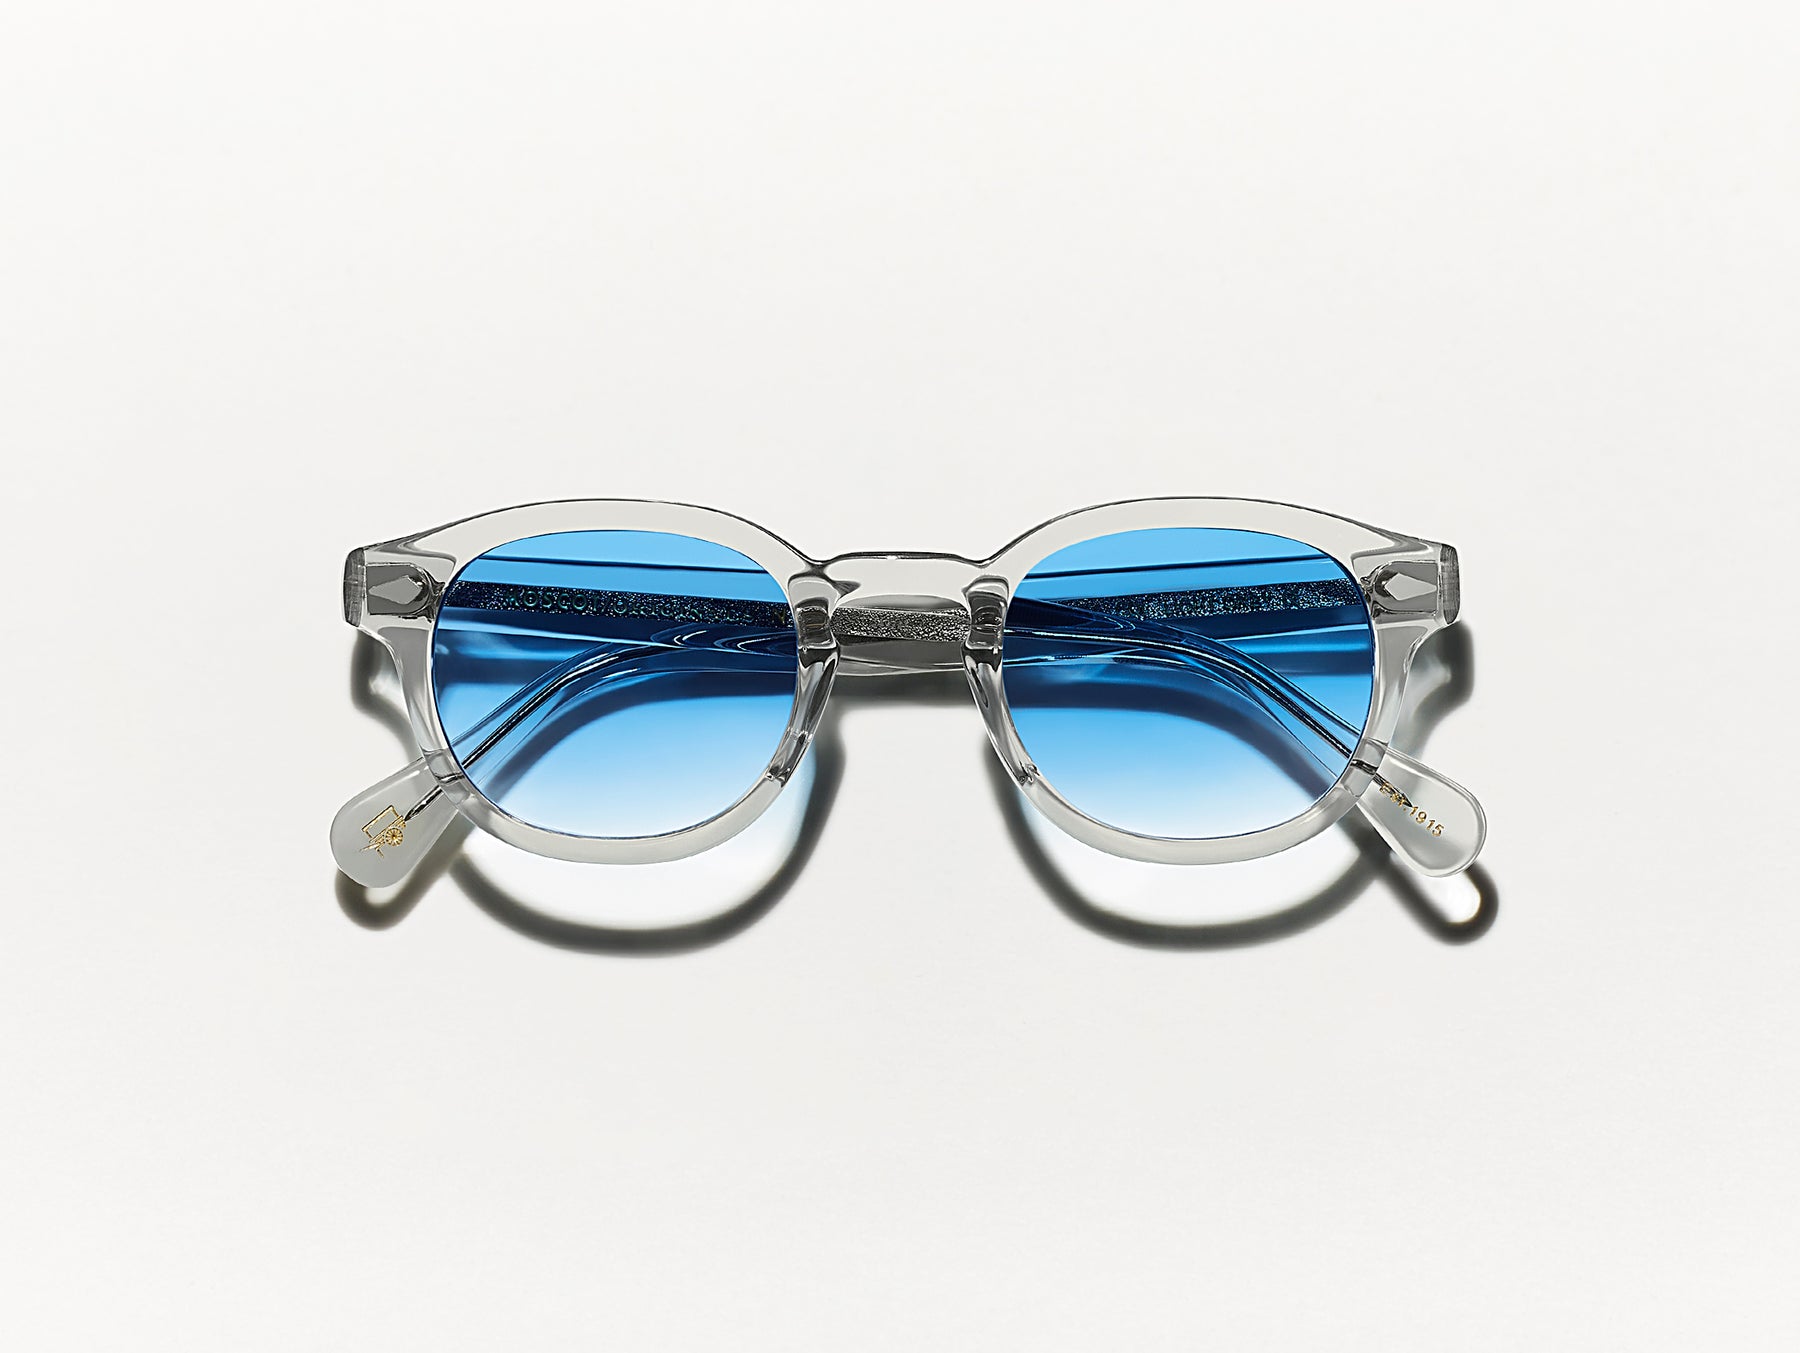 The LEMTOSH Light Grey with Broadway Blue Fade Tinted Lenses